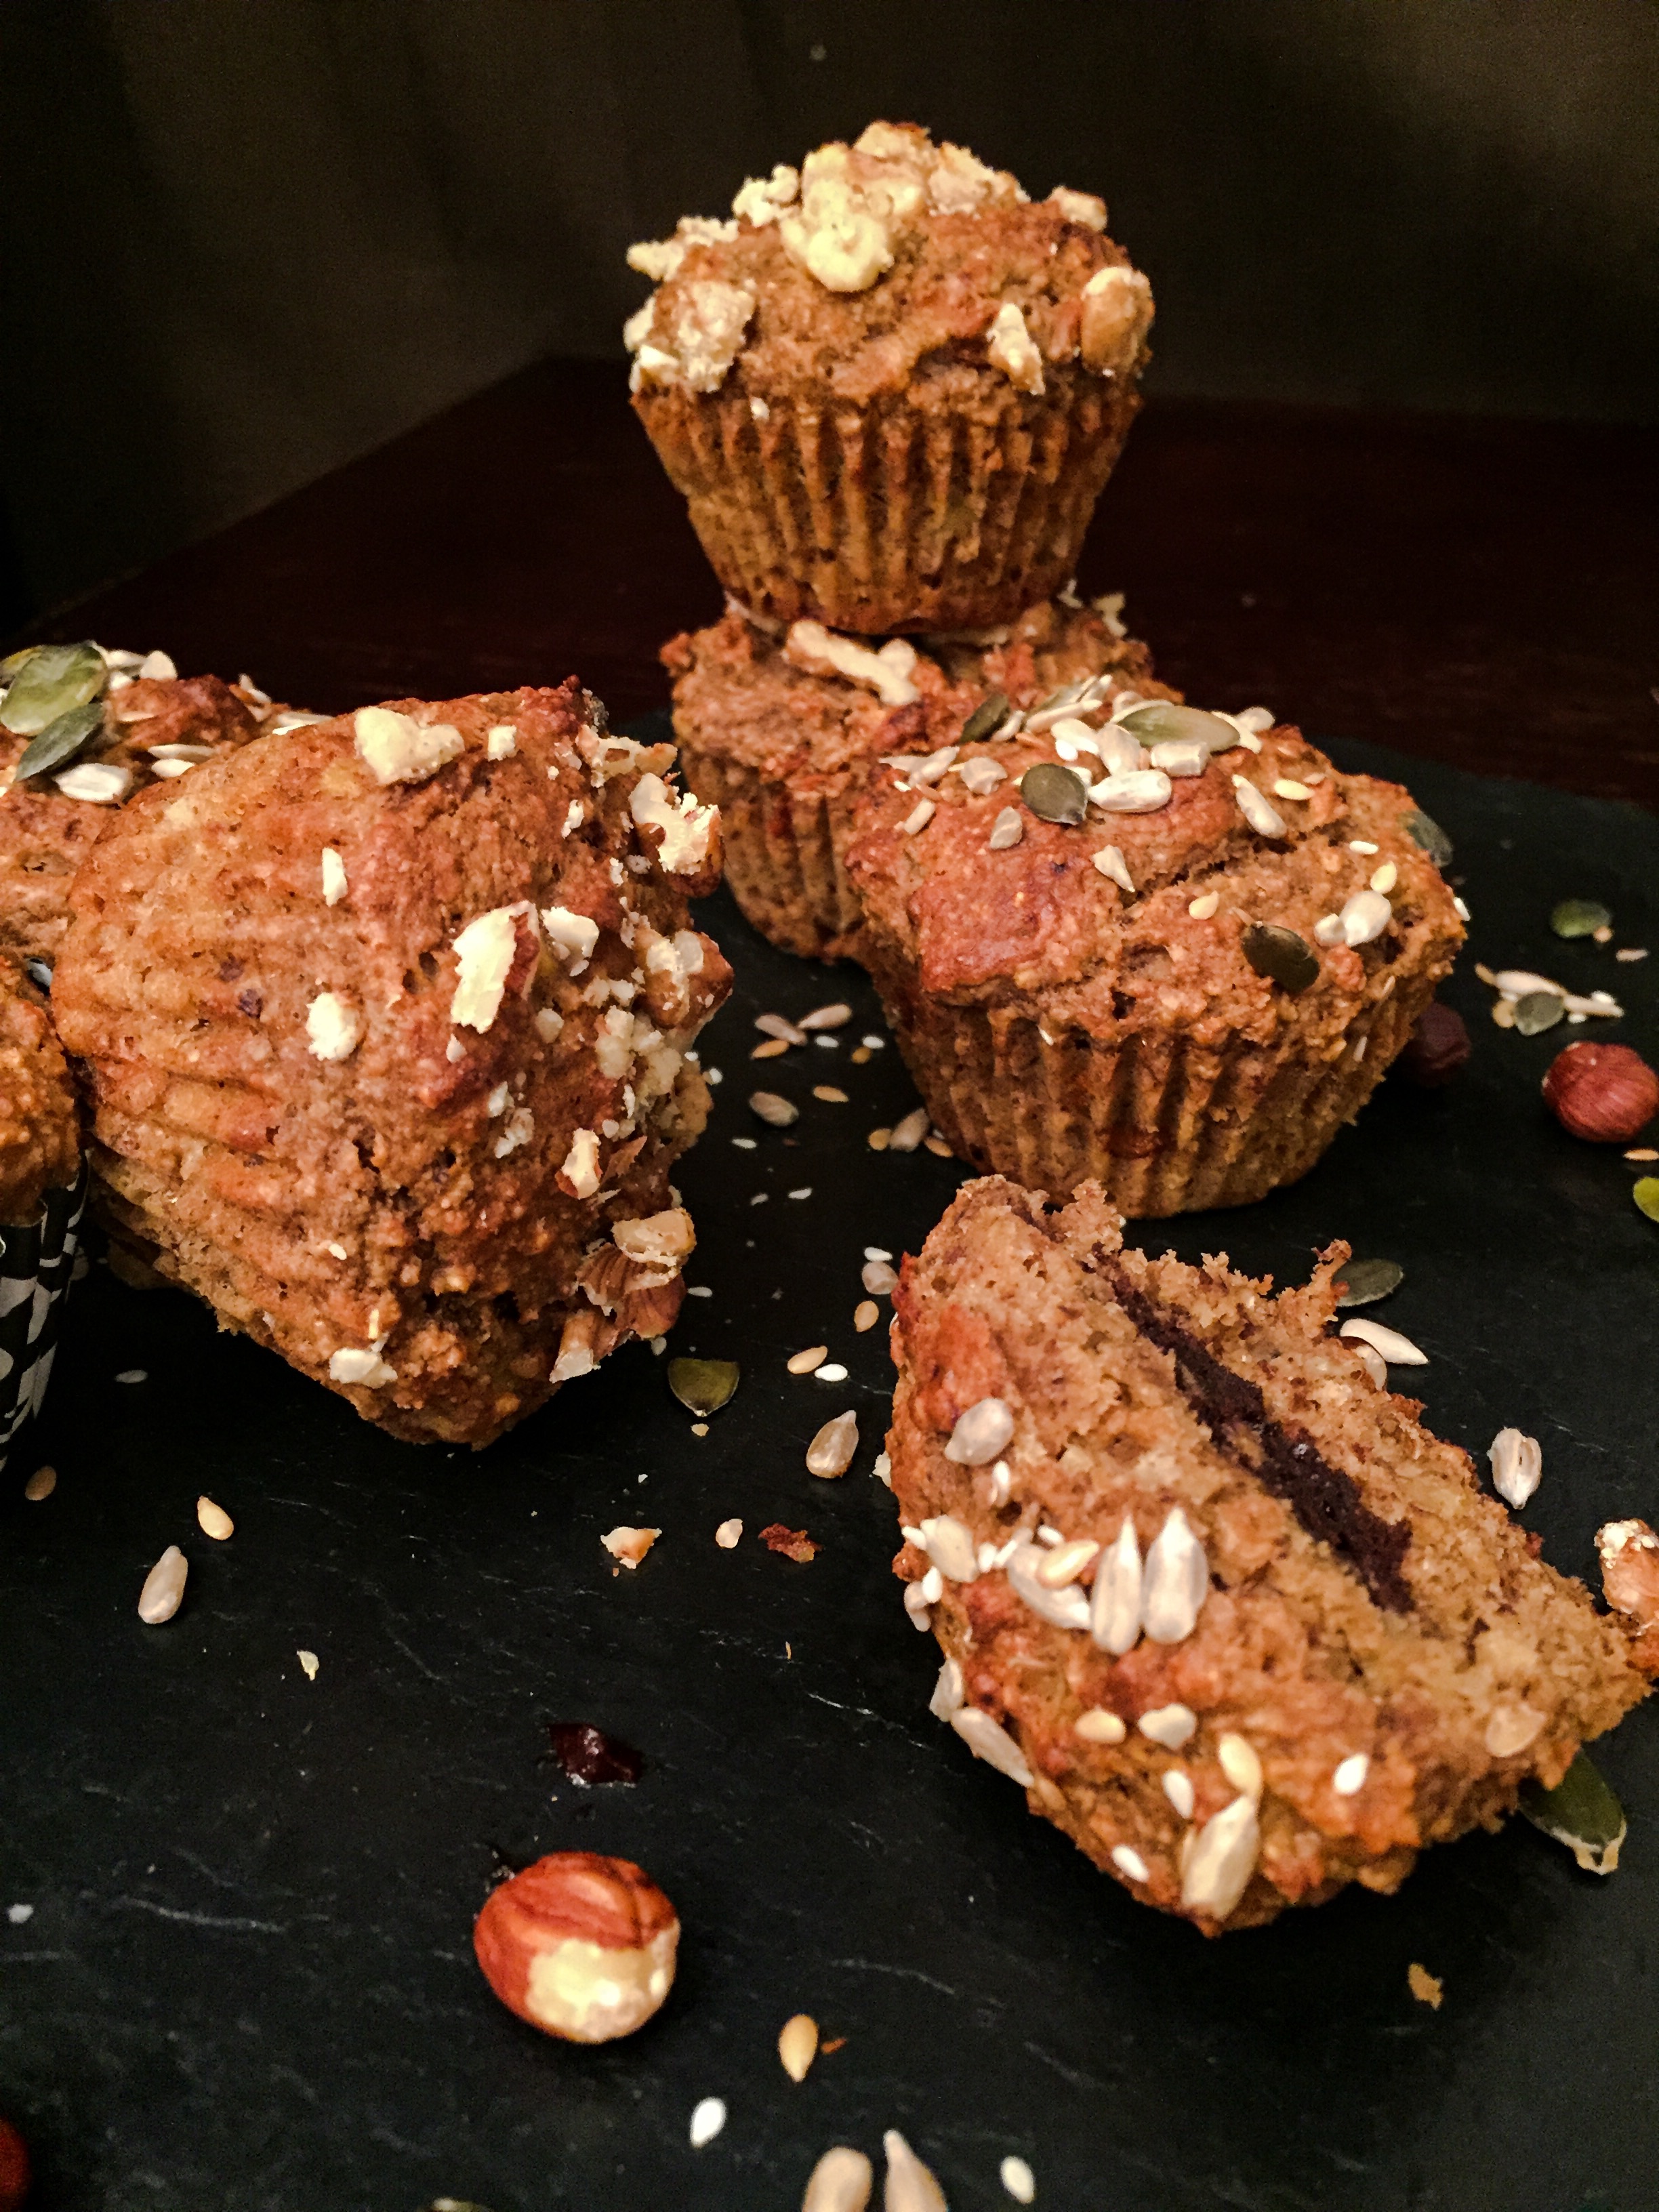 Nutty Protein Muffins with Protella filling